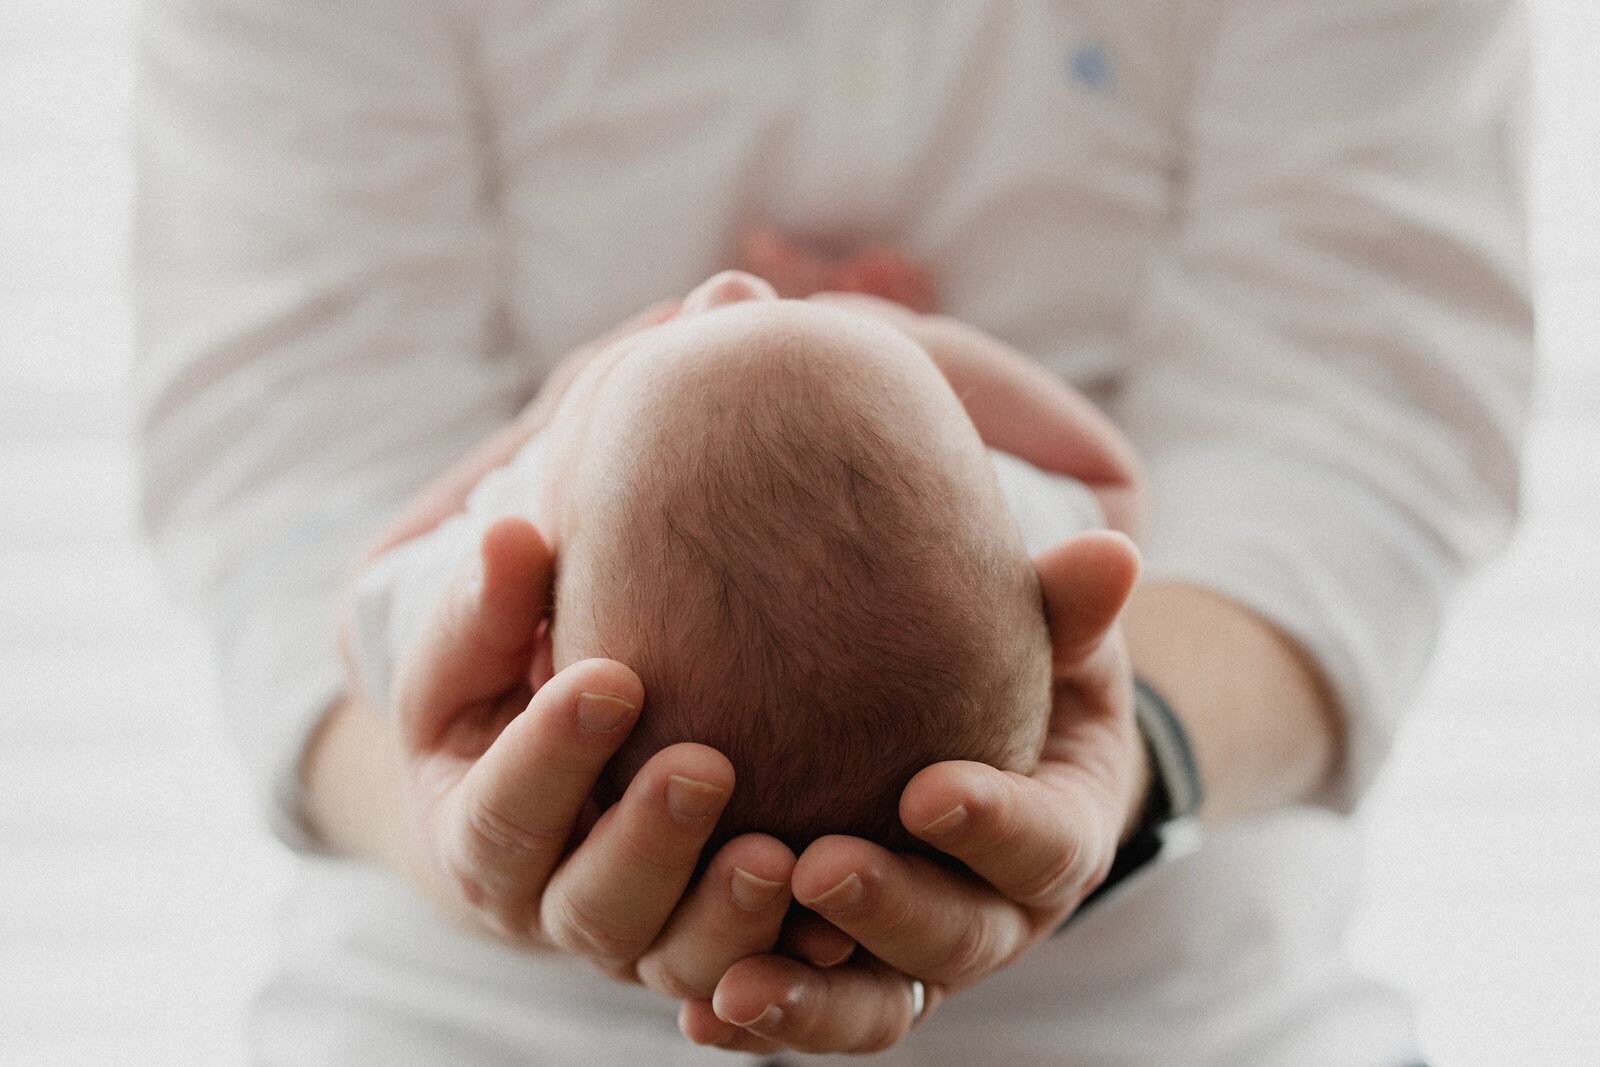 A dad holds his newborn son's head in his hands